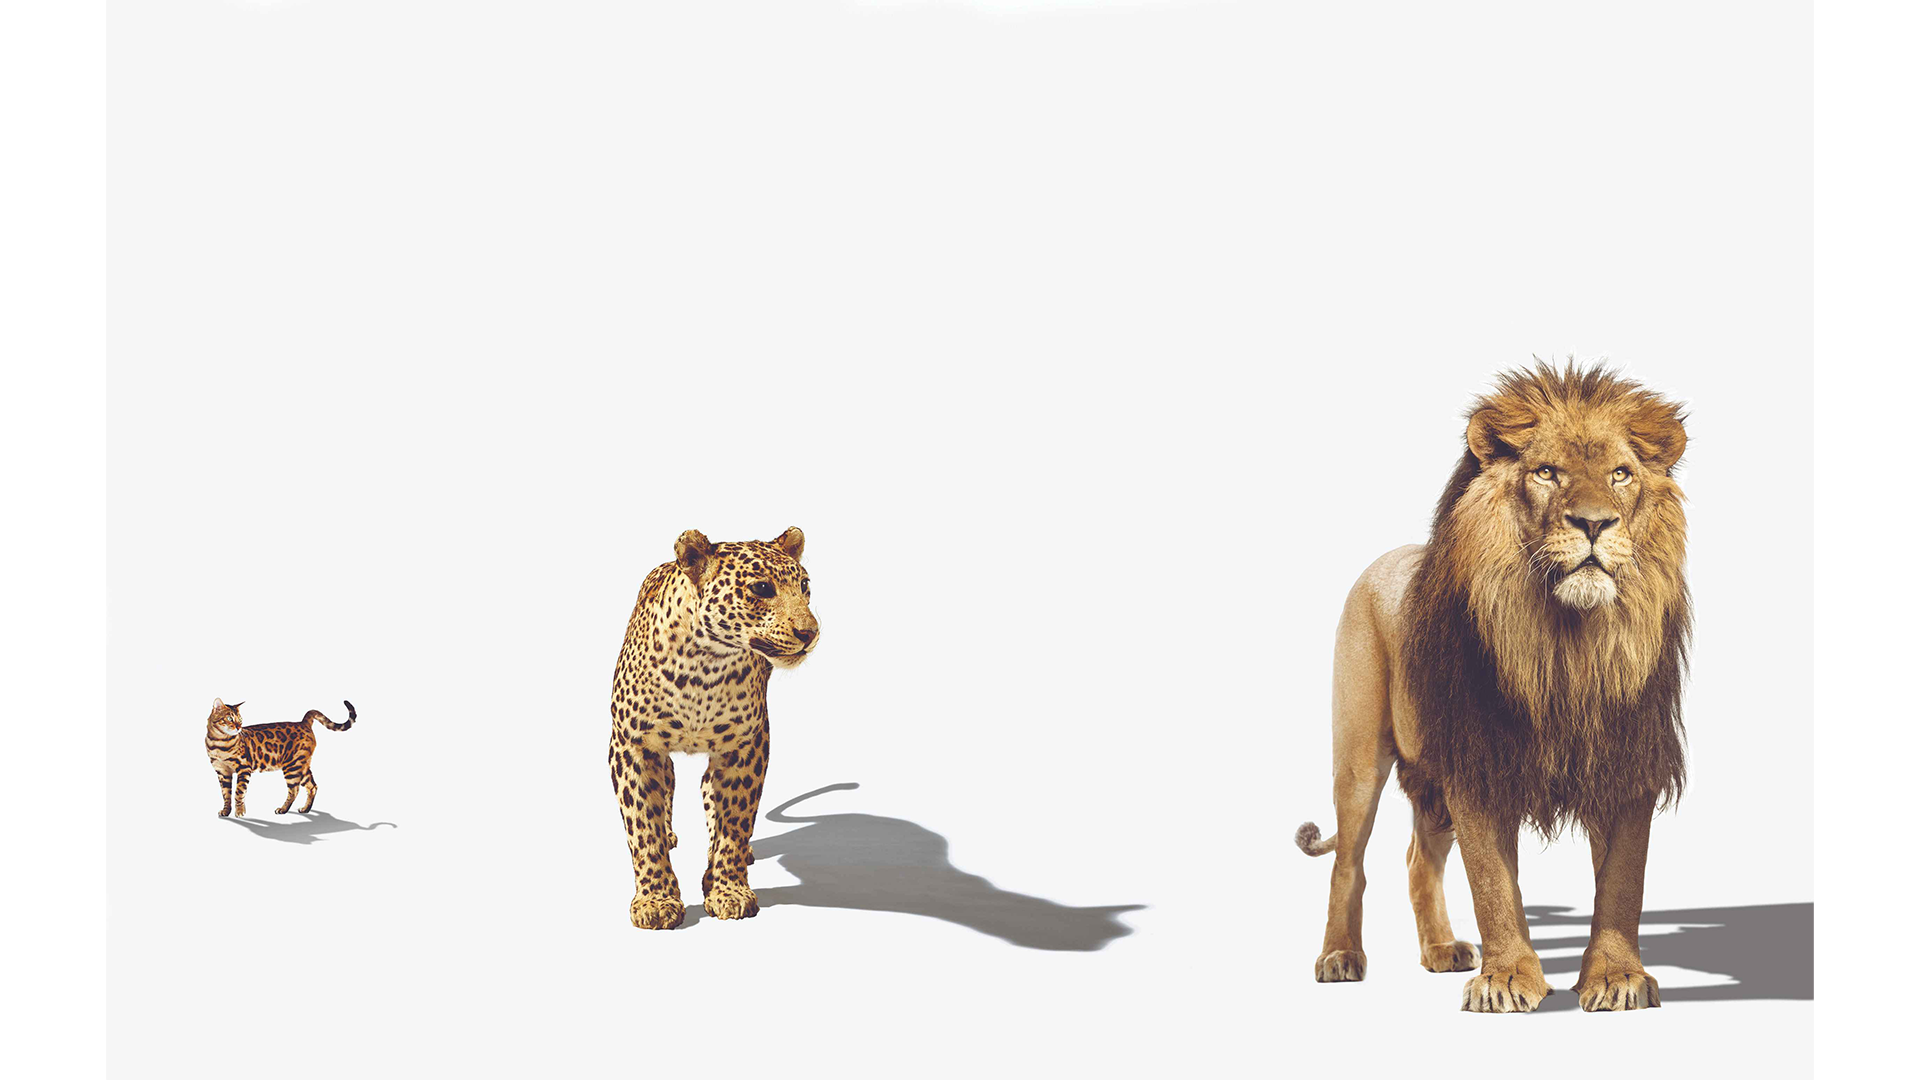 Left to right: A photo of a Bengal cat, a Leopard, and a Lion